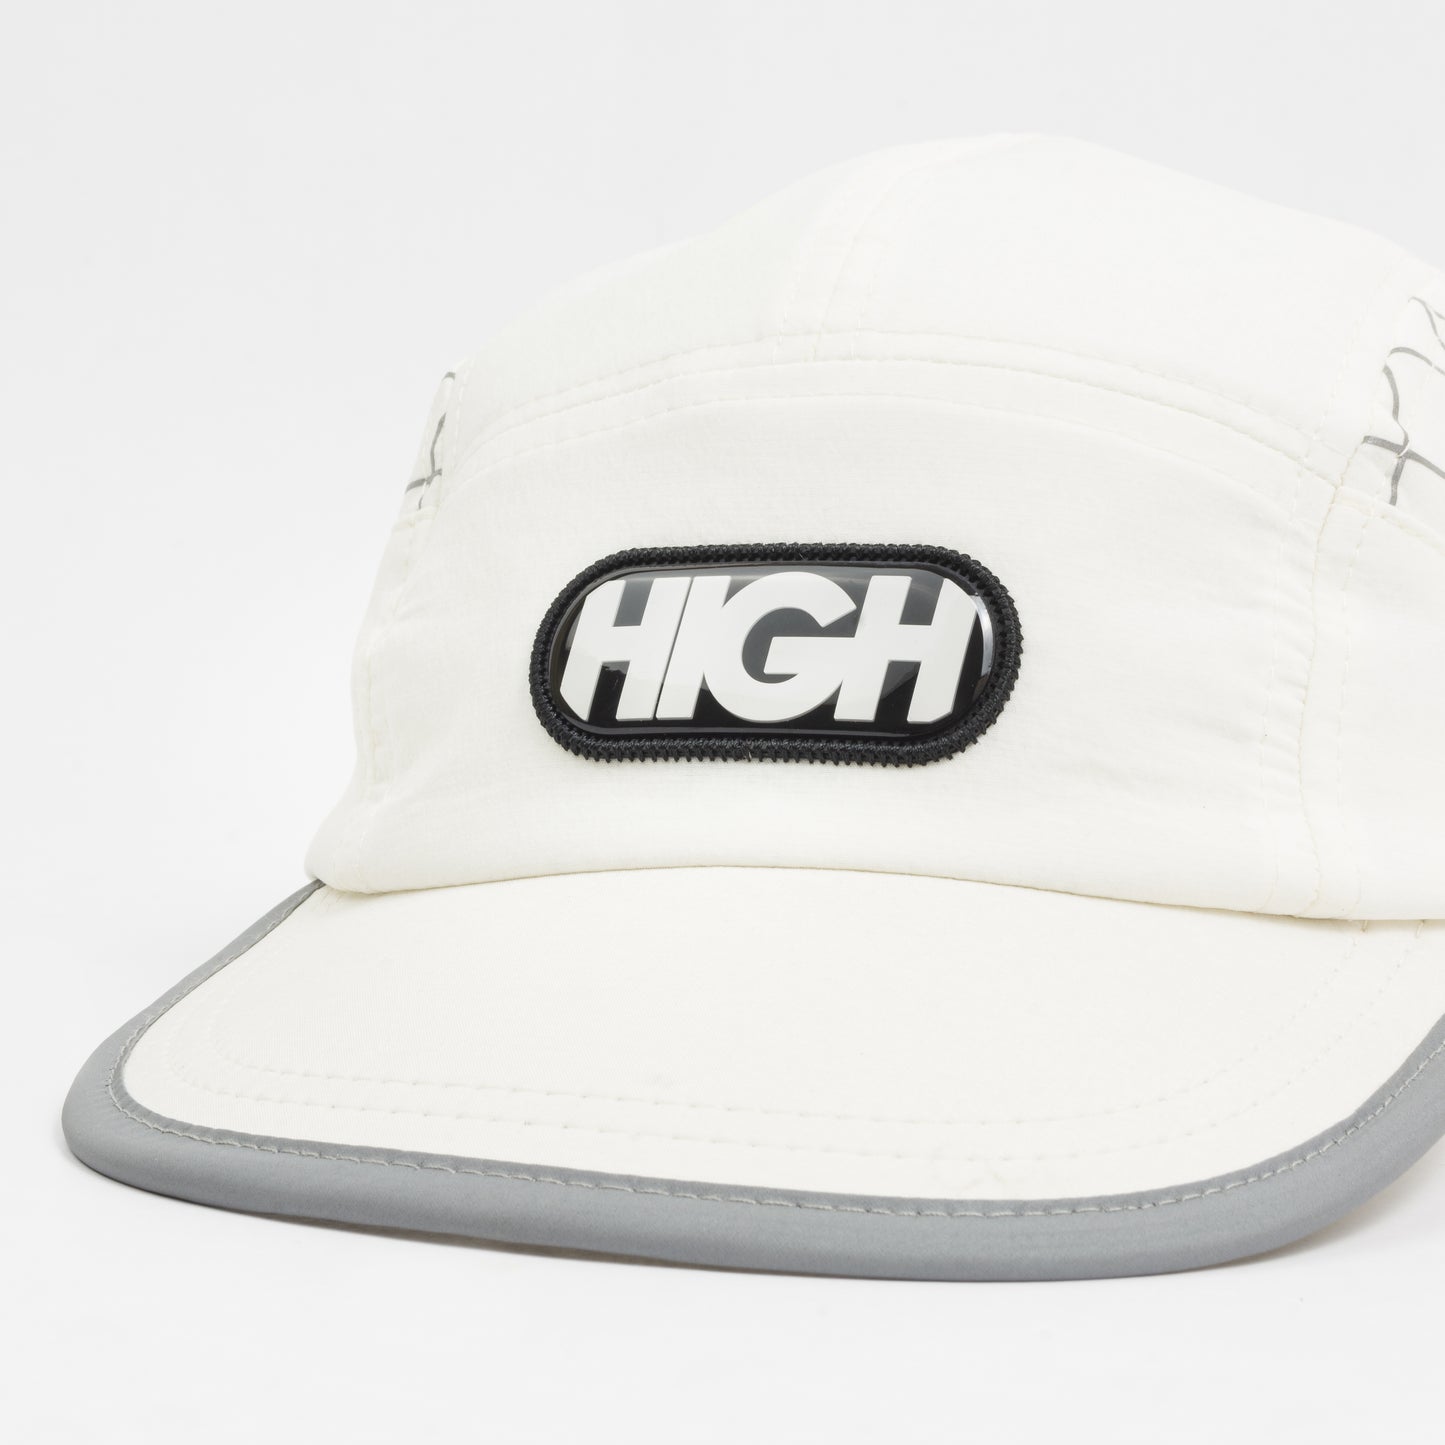 HIGH - Reflective 5 Panel Squared "White"